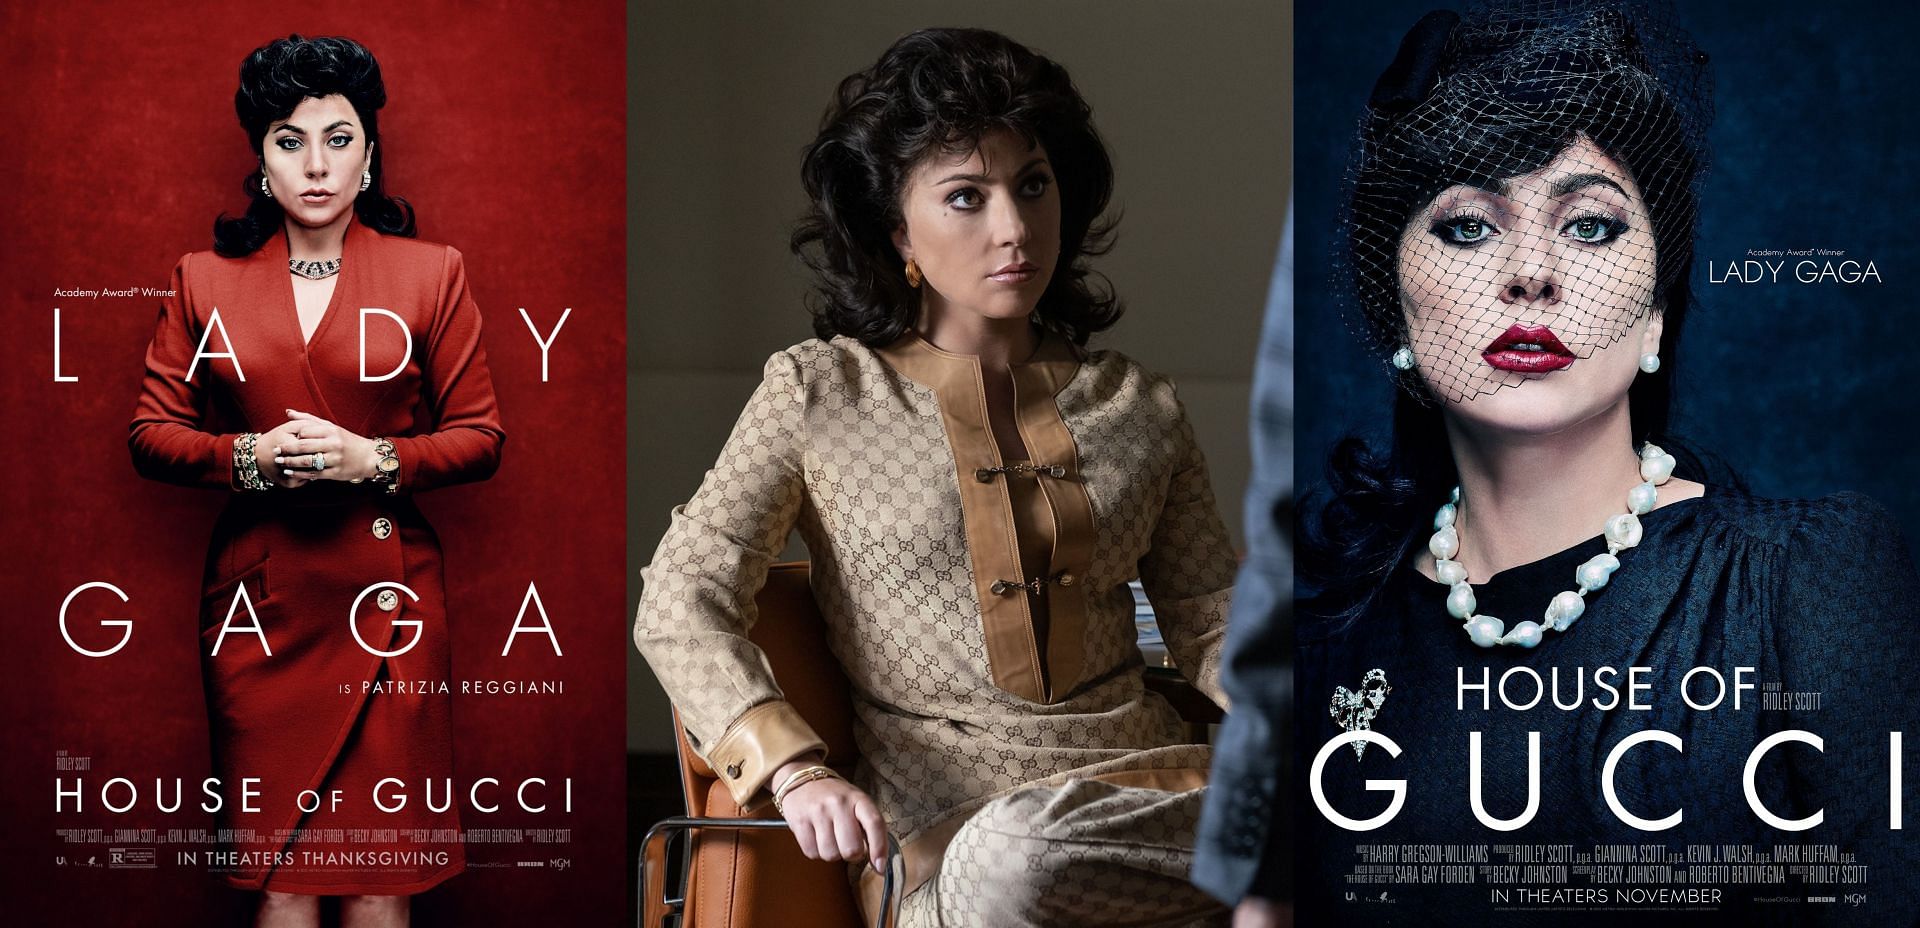 Lady Gaga as Patrizia Reggiani in House of Gucci (Image via MGM and Universal Pictures)